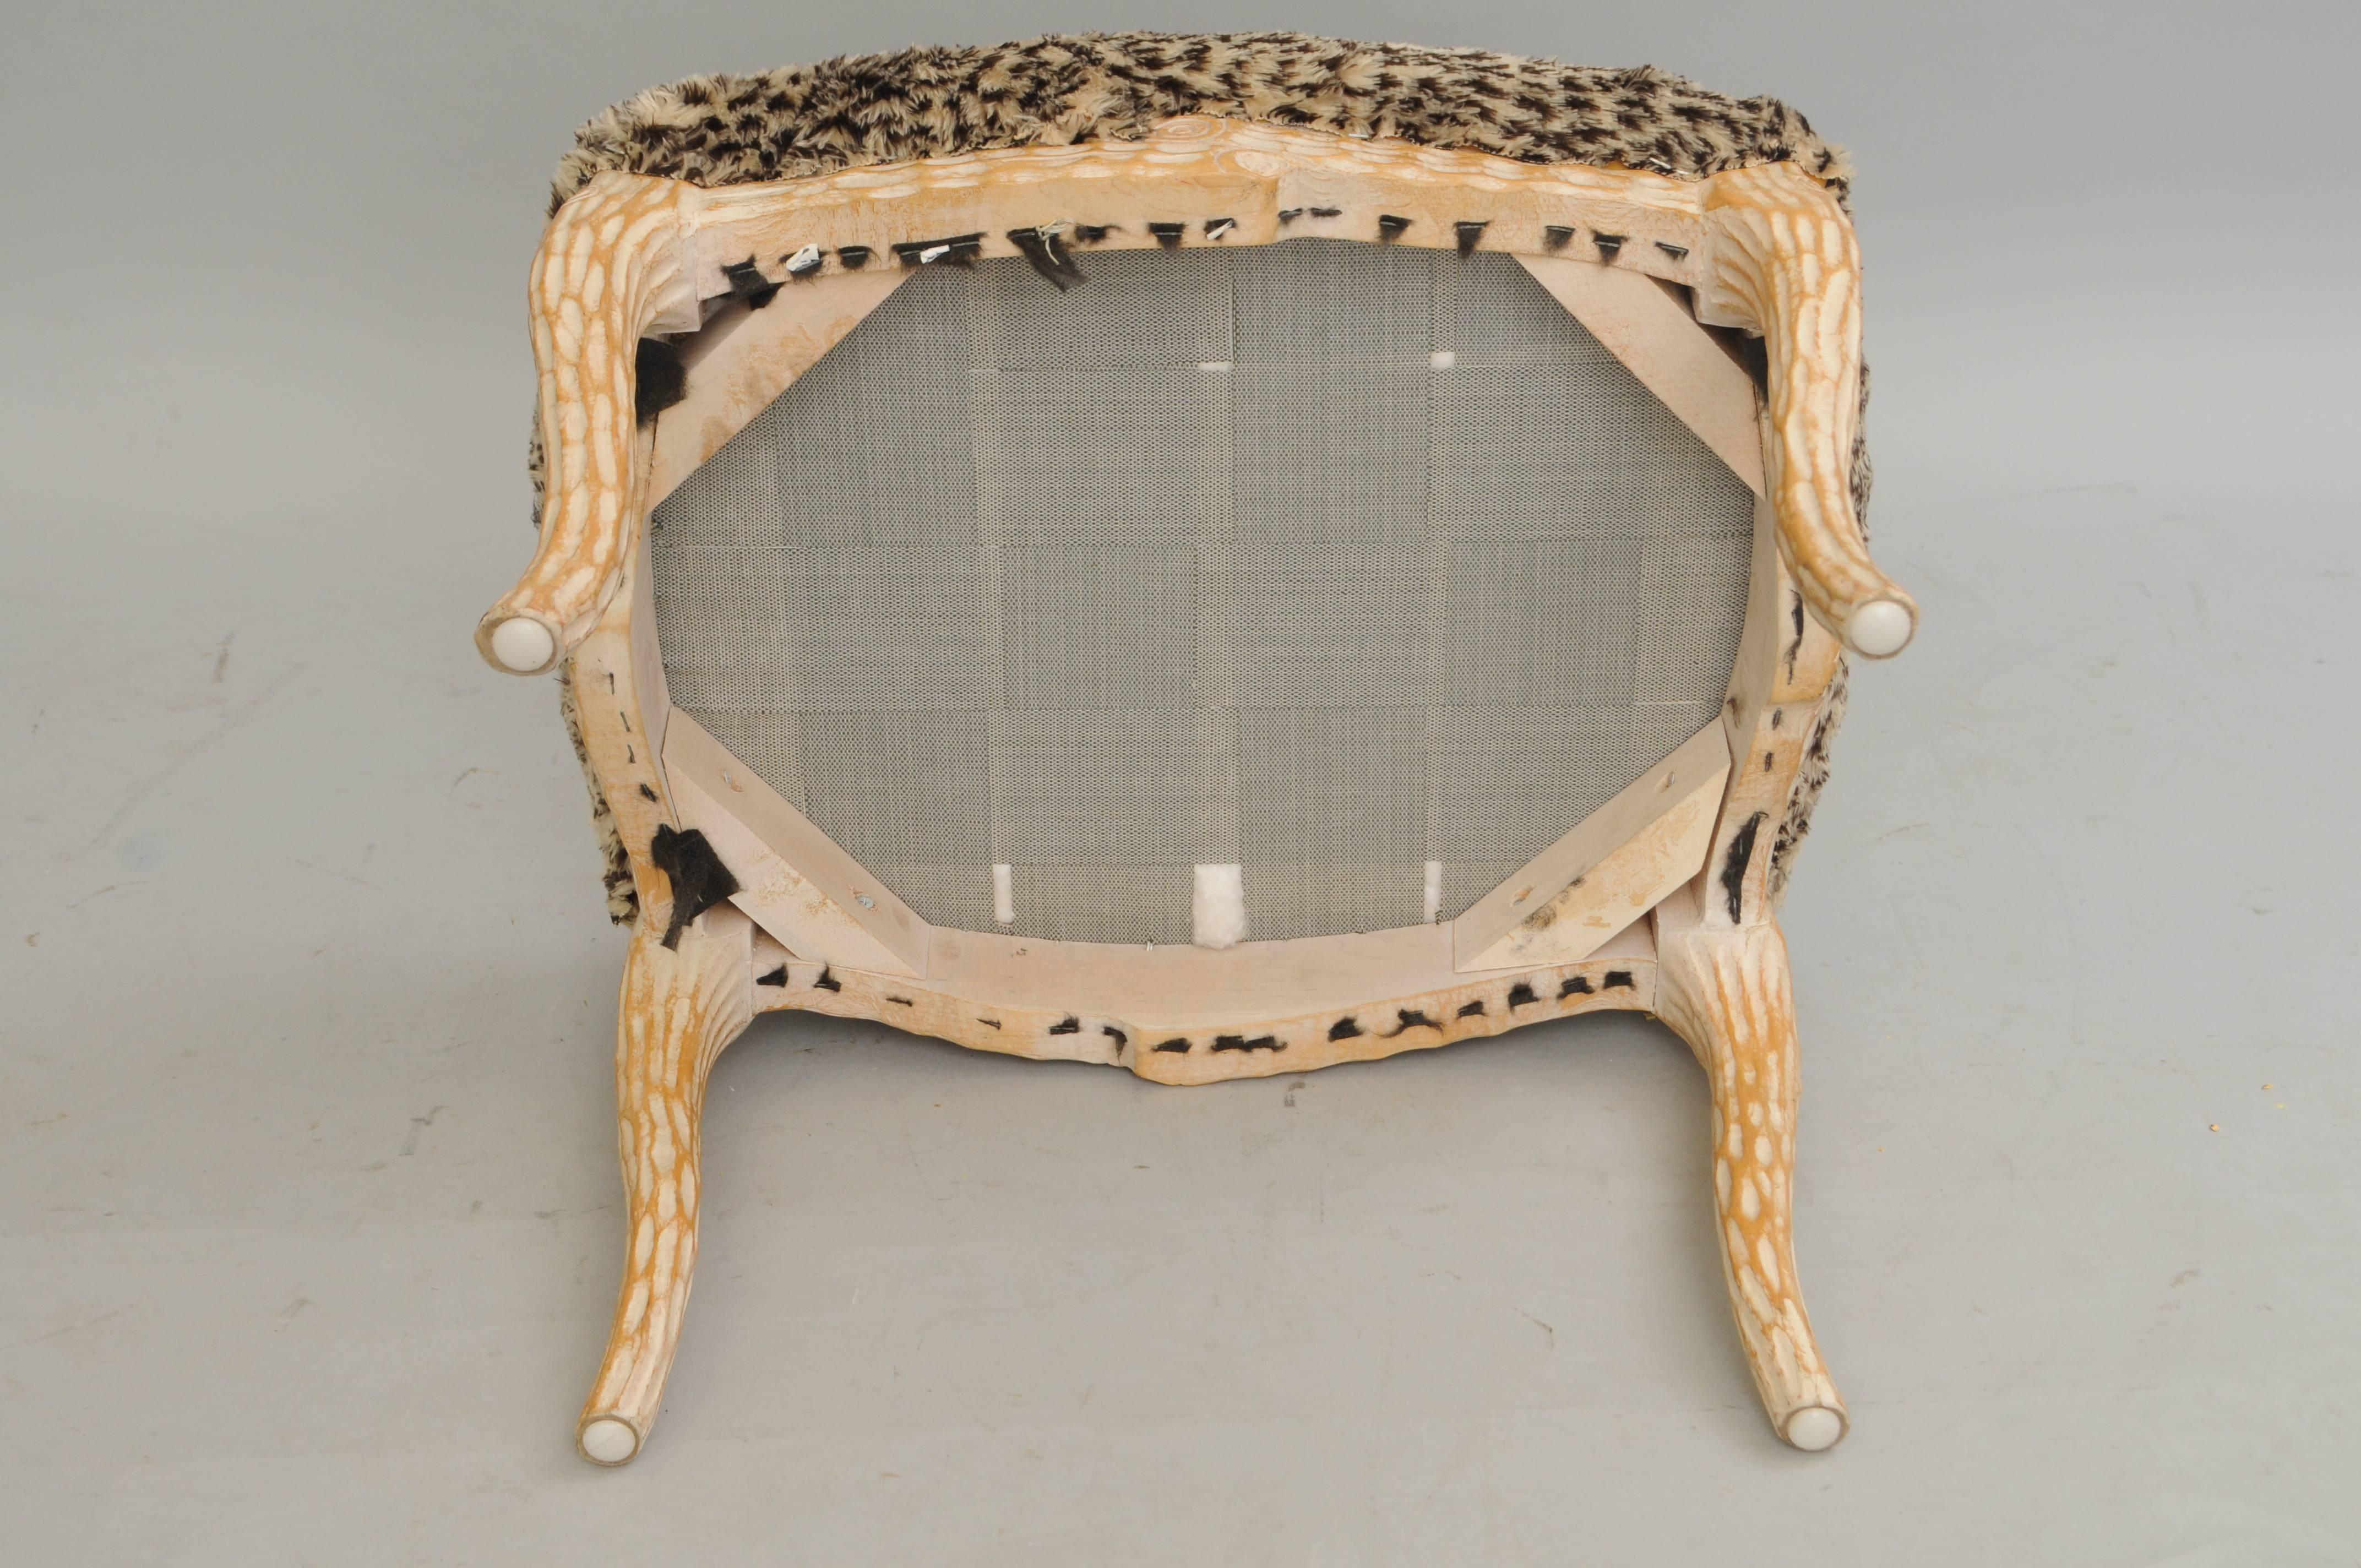 Carved Vintage Hollywood Regency Faux Bois Wood Stool Bench Ottoman Fuzzy Leopard Seat